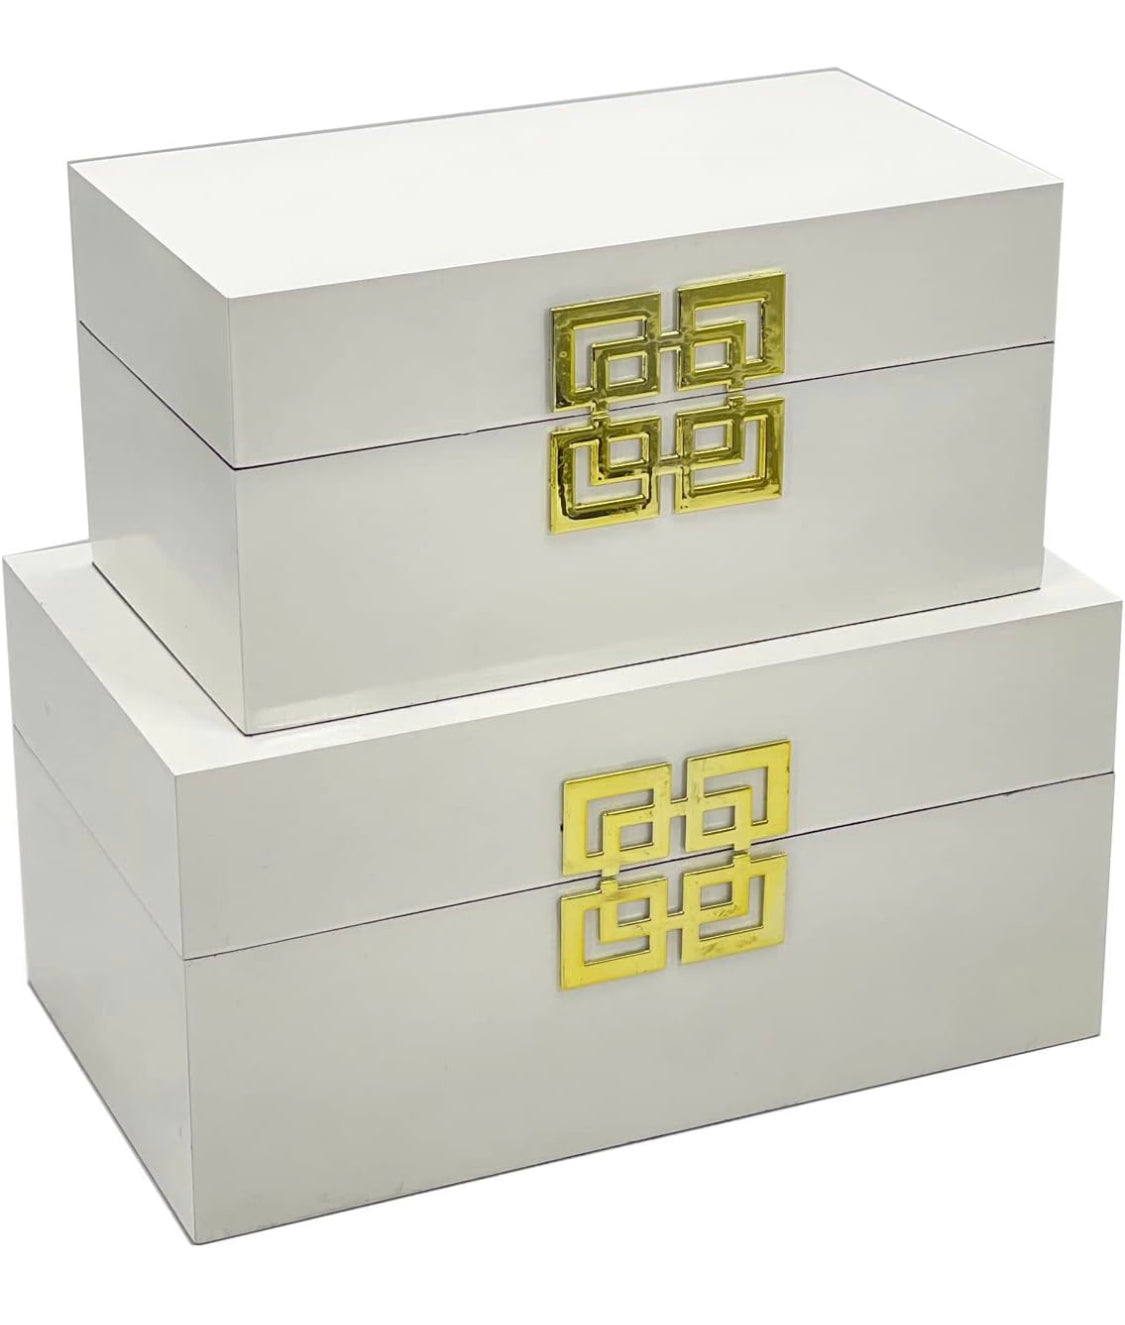 Galt International Large & Small Decorative Storage Box w/Hinged Lid - Classic Design Wood Decor Boxes with Geometric Opening Clasp - Home & Office Storage - Set of 2